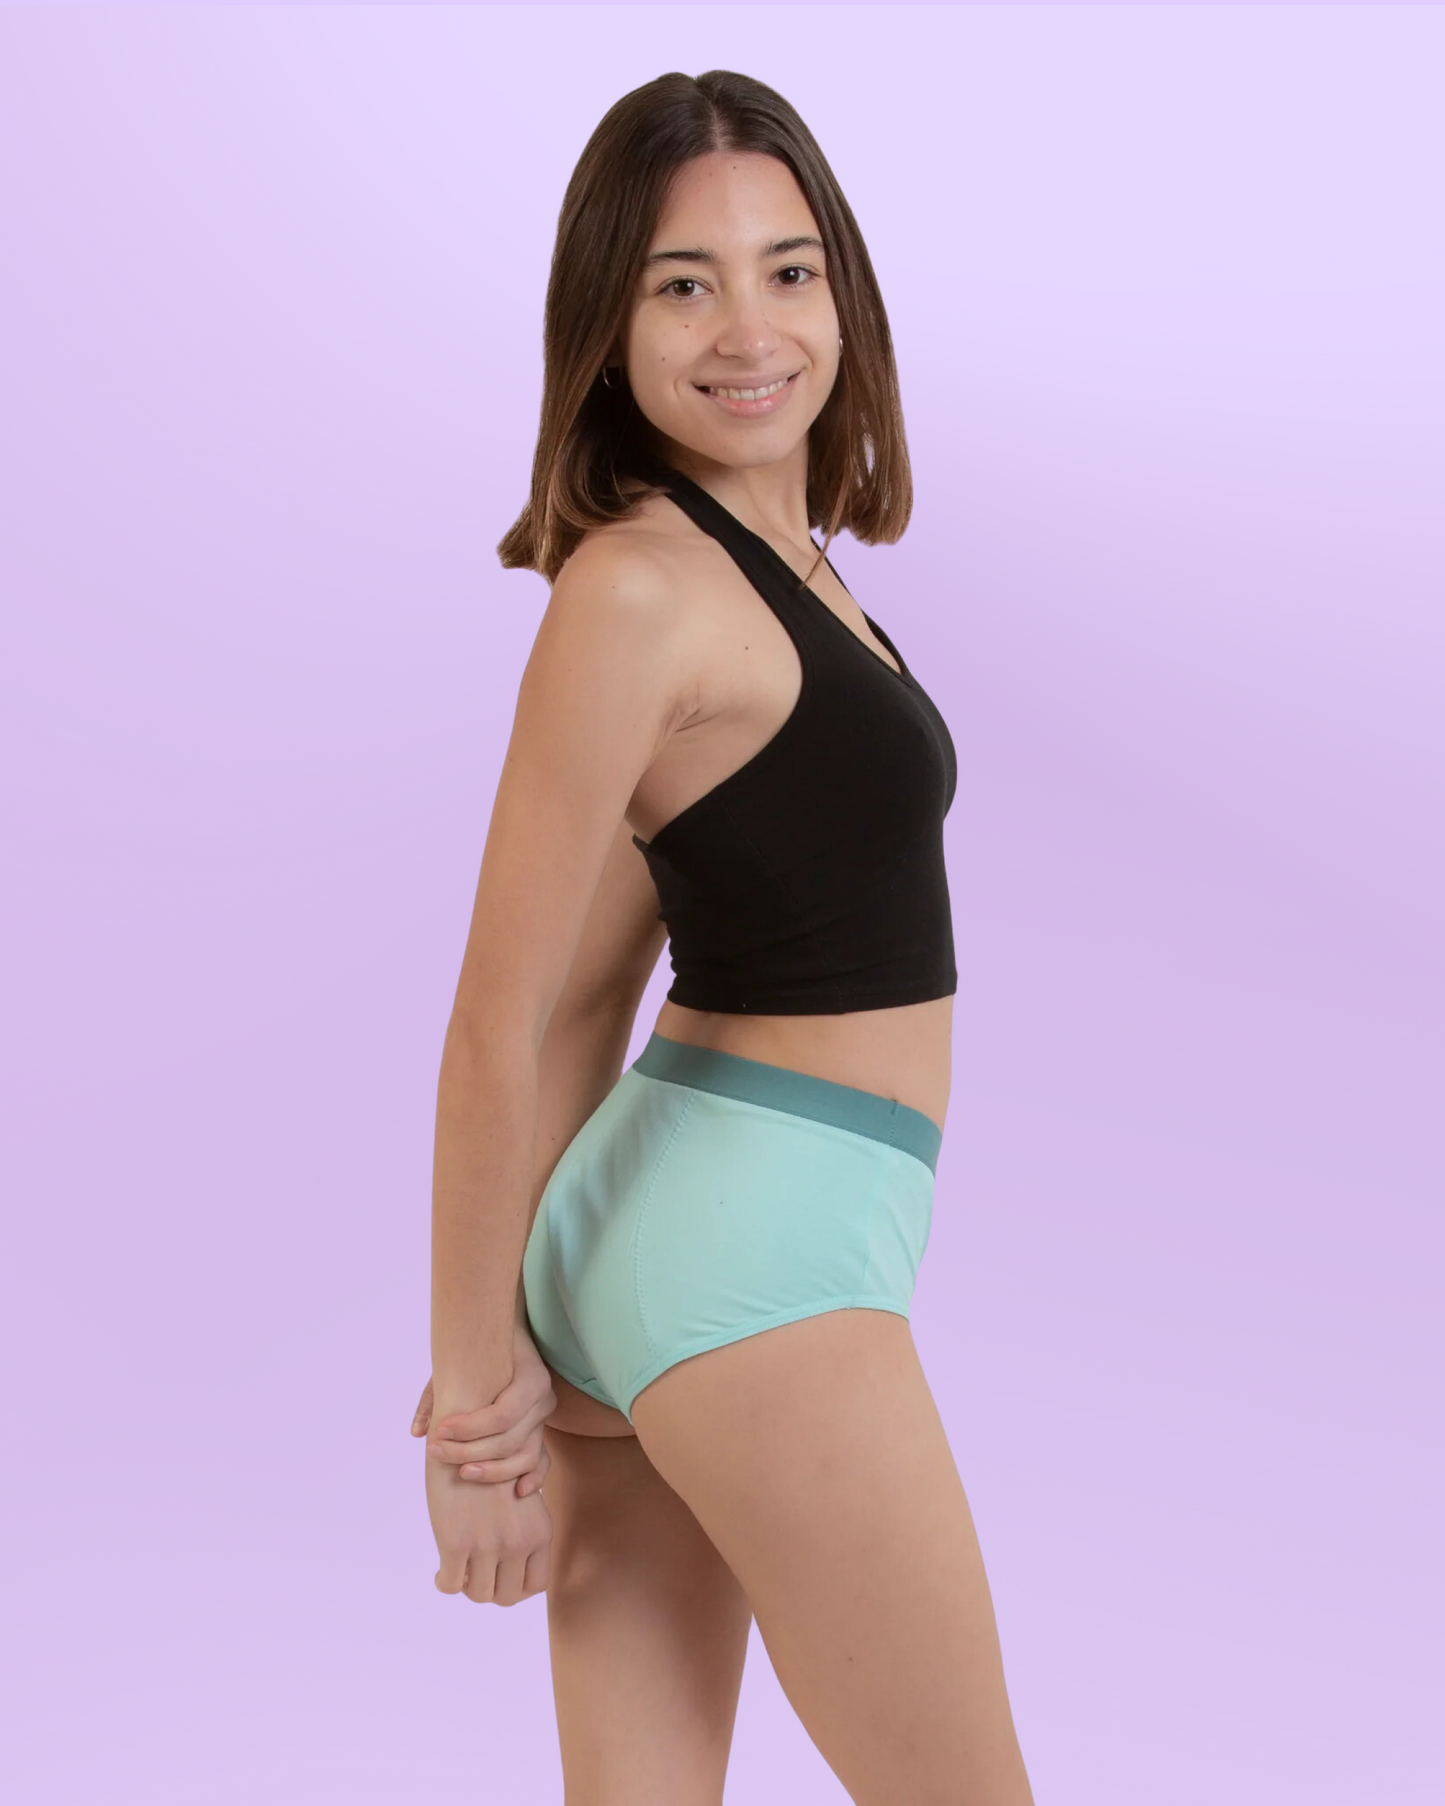 Period underwear for teens turquoise side general